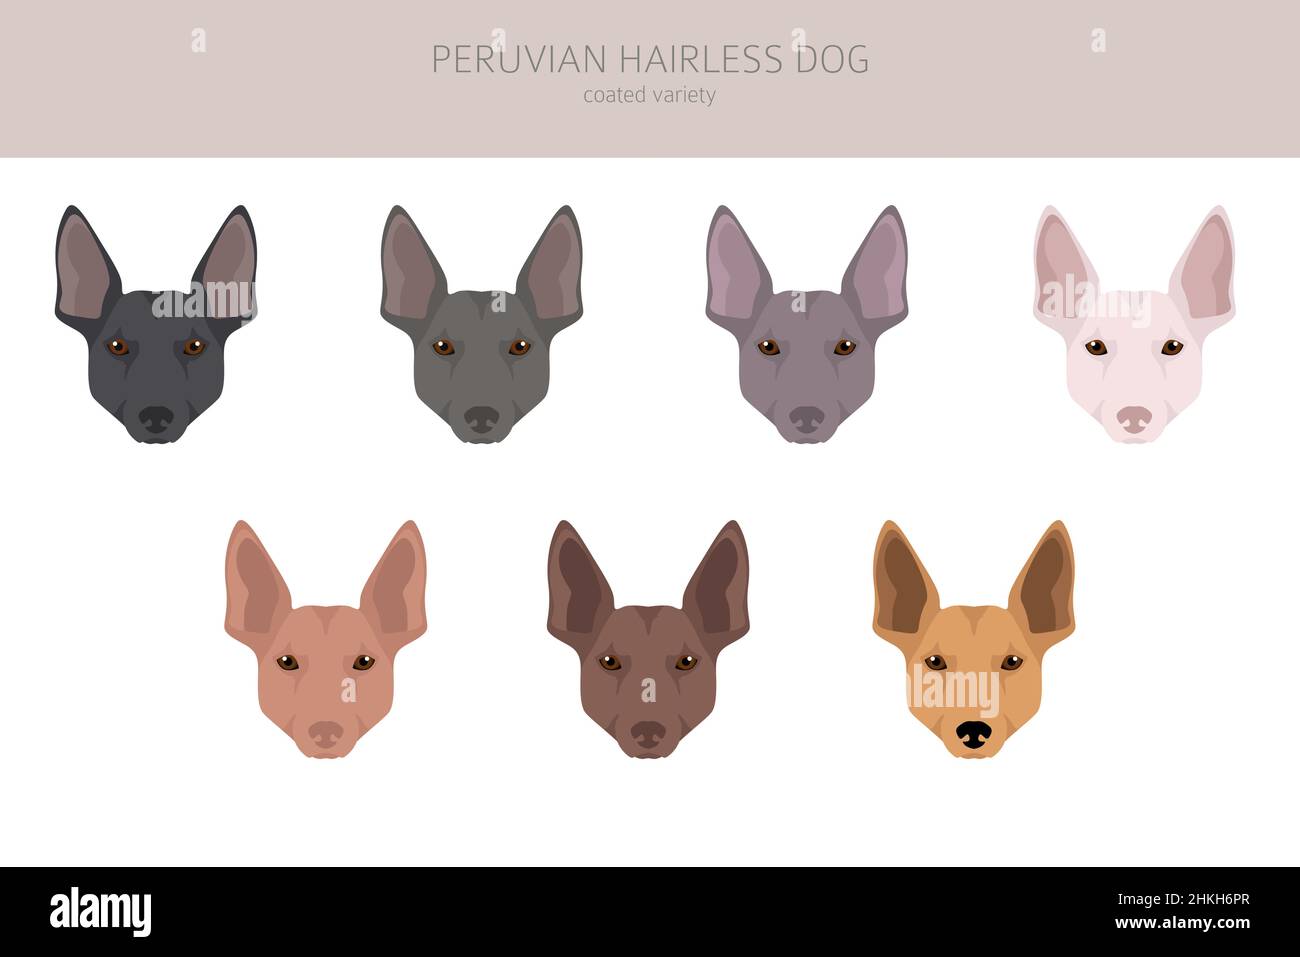 Peruvian hairless dog clipart. Different poses, coat colors set.  Vector illustration Stock Vector